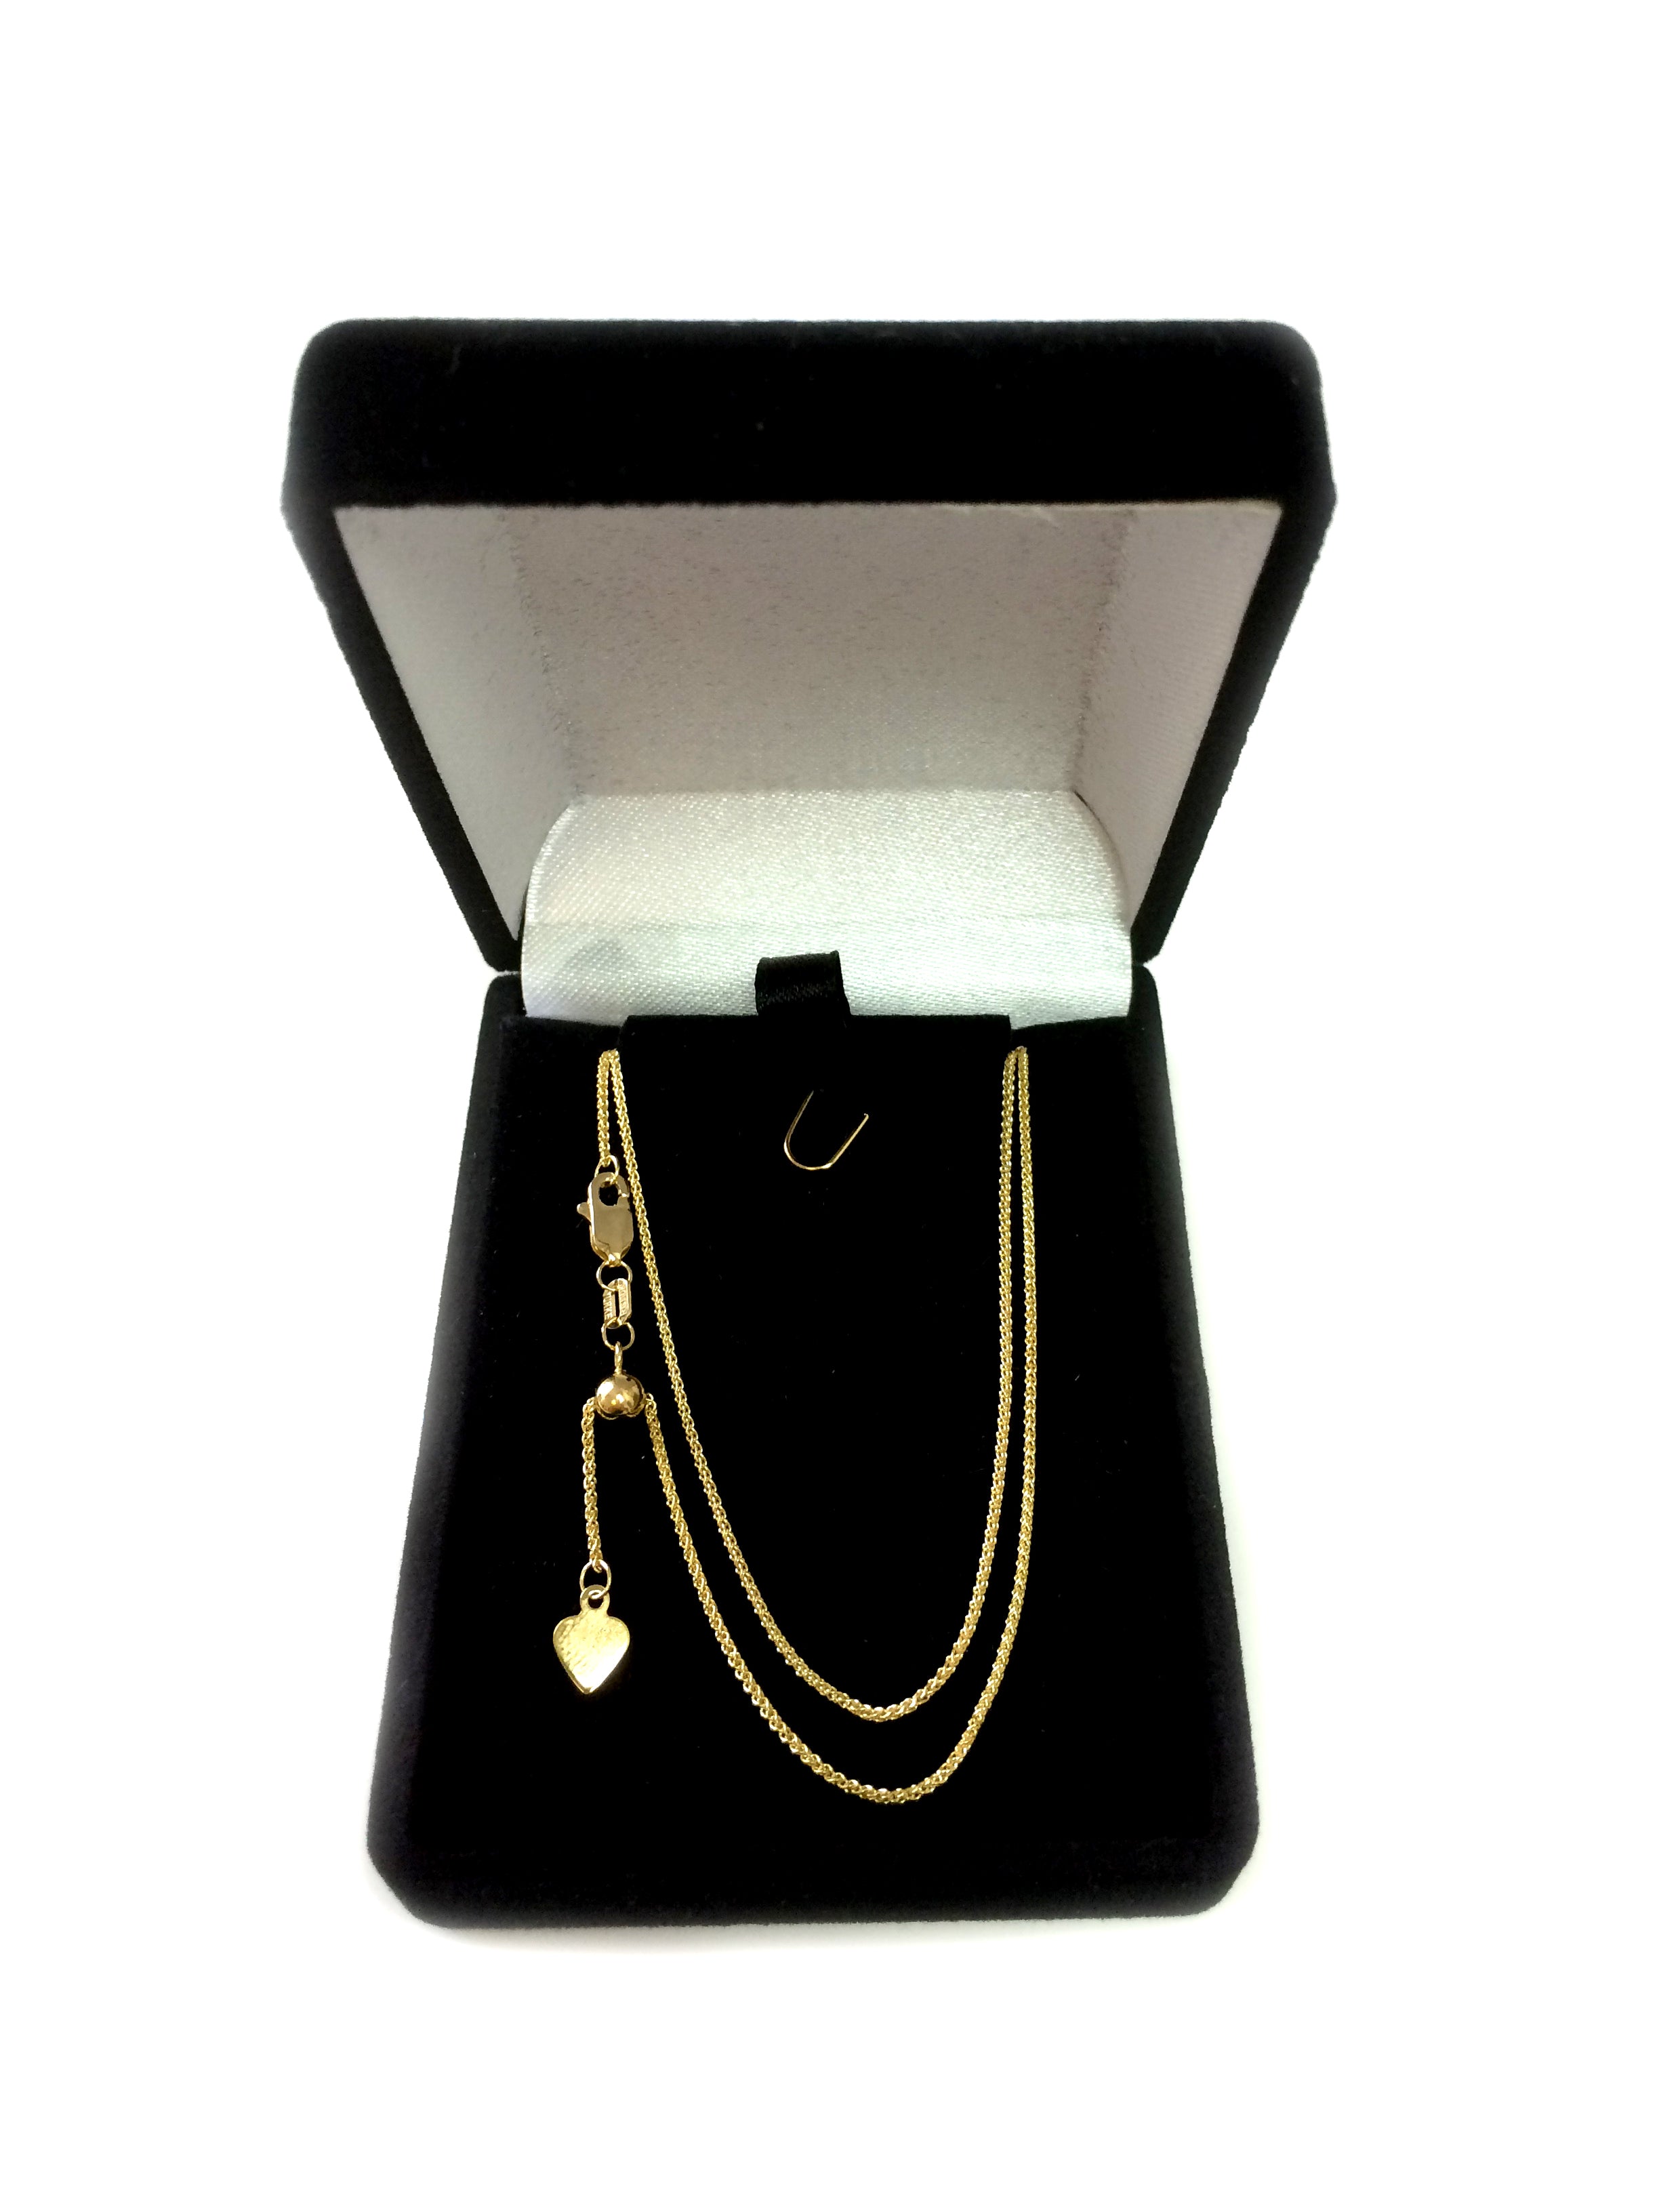 10k Yellow Gold Adjustable Wheat Link Chain Necklace, 1.0mm, 22"